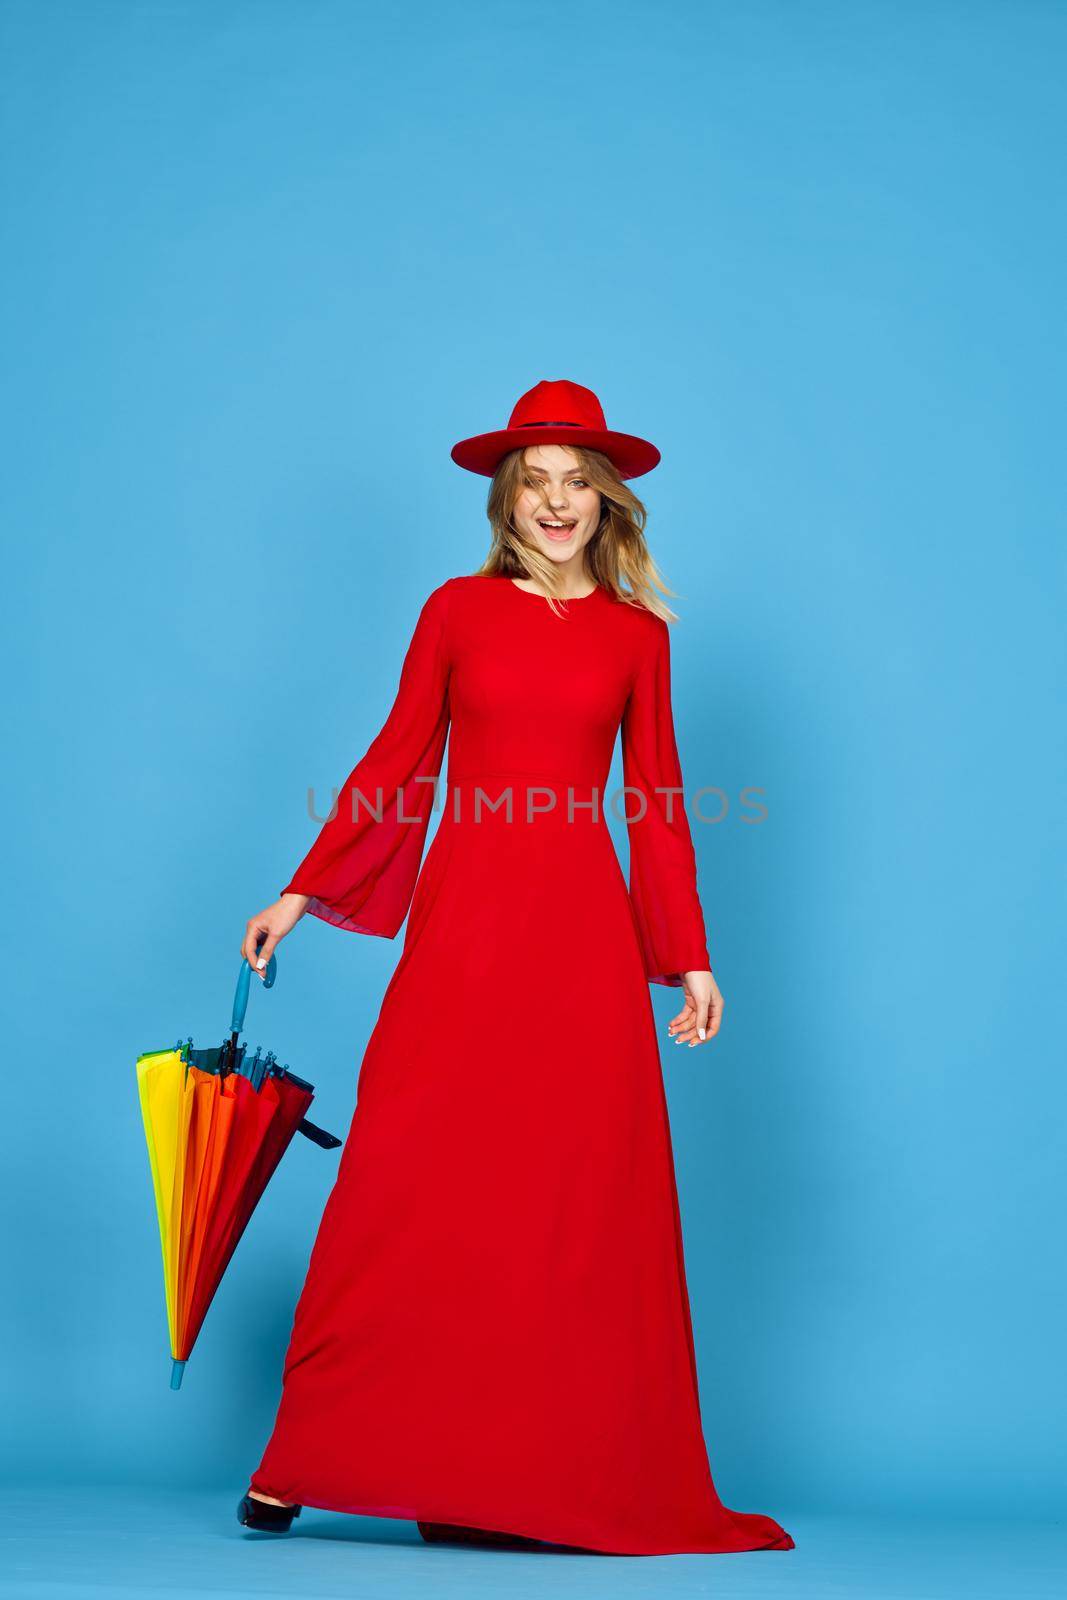 woman in red dress multicolored umbrella blue background by Vichizh